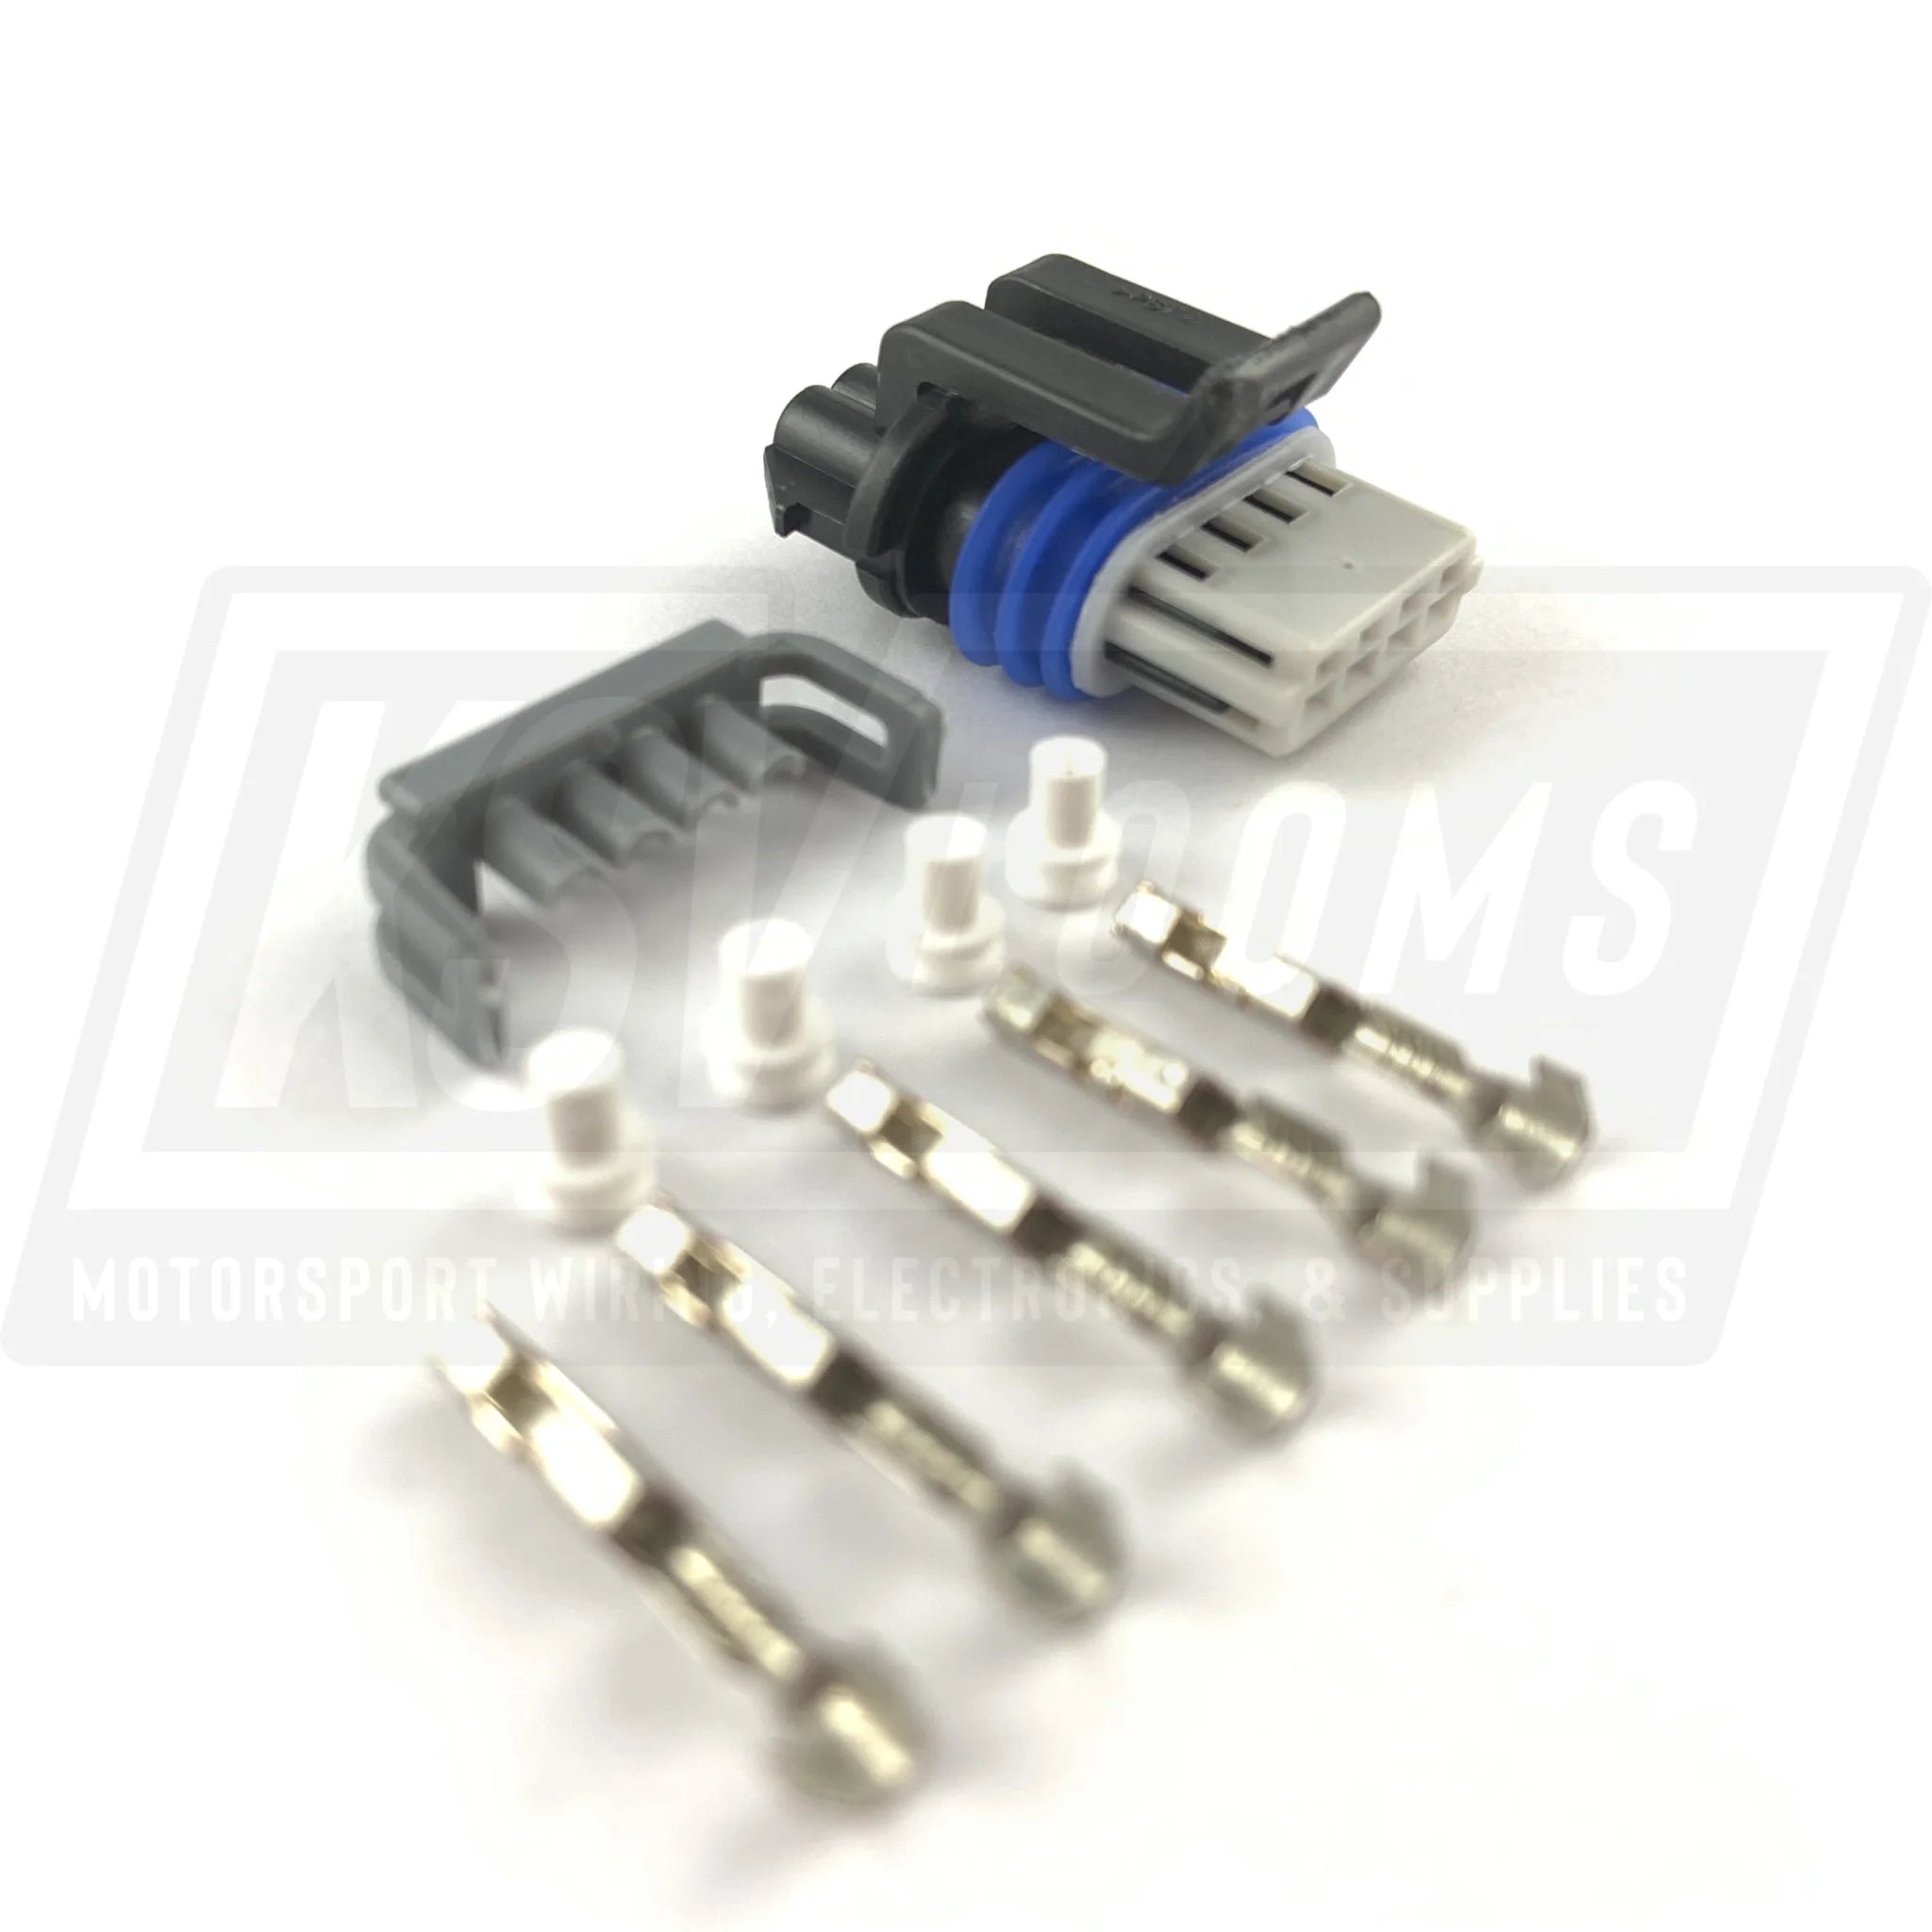 4-Way Connector Kit For Gm Ls2 Ls7 Ignition Coil (22-20 Awg)